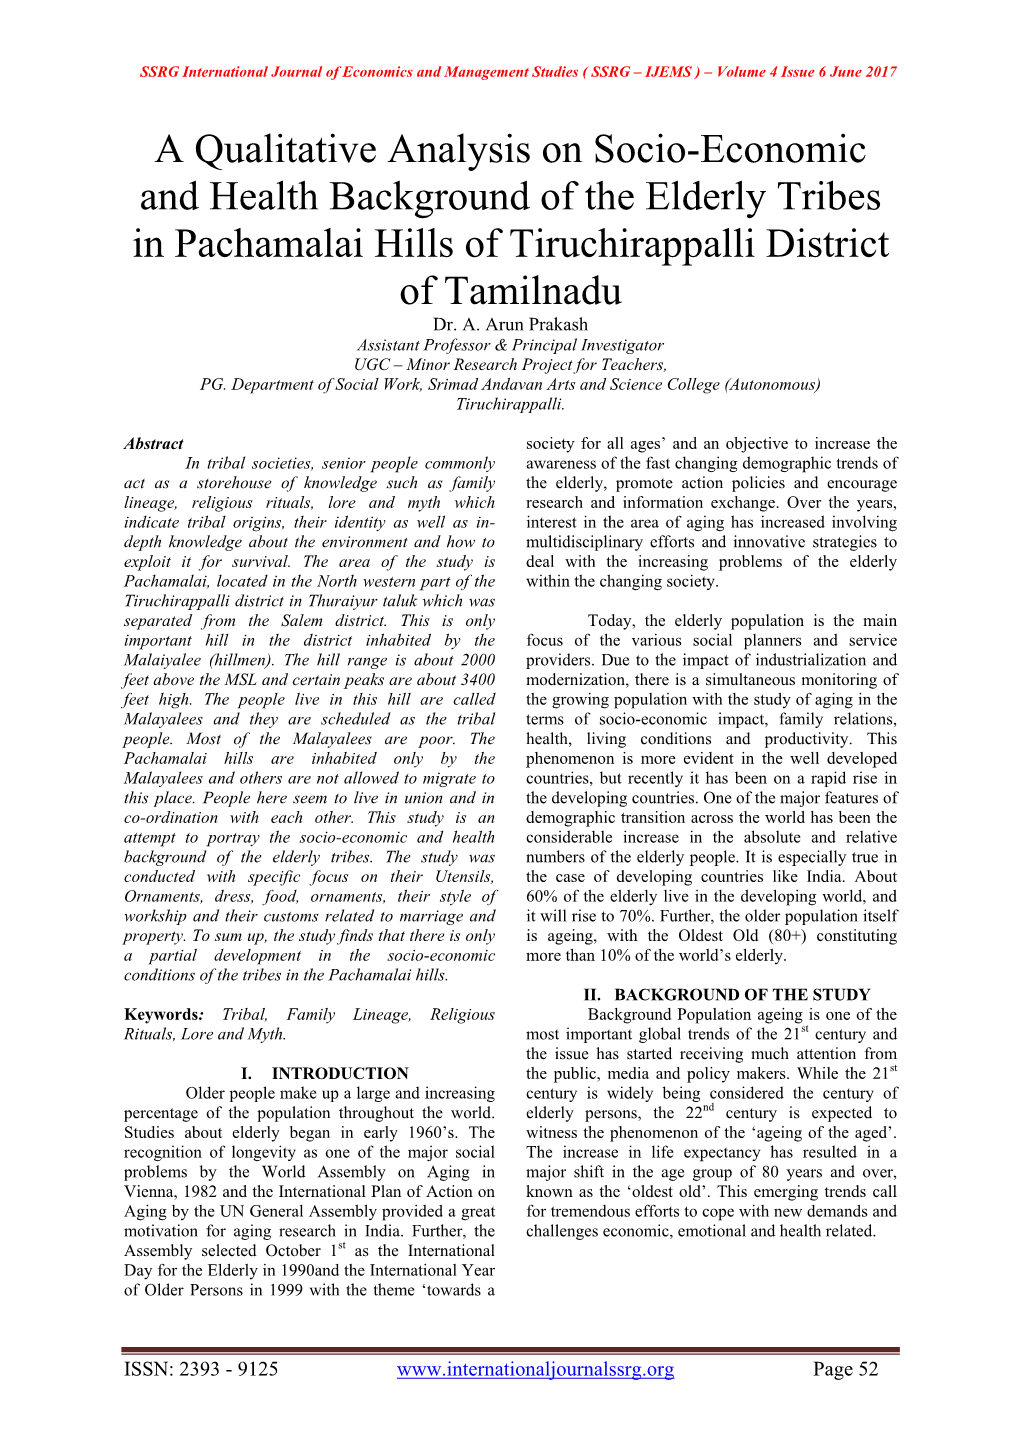 A Qualitative Analysis on Socio-Economic and Health Background of the Elderly Tribes in Pachamalai Hills of Tiruchirappalli District of Tamilnadu Dr